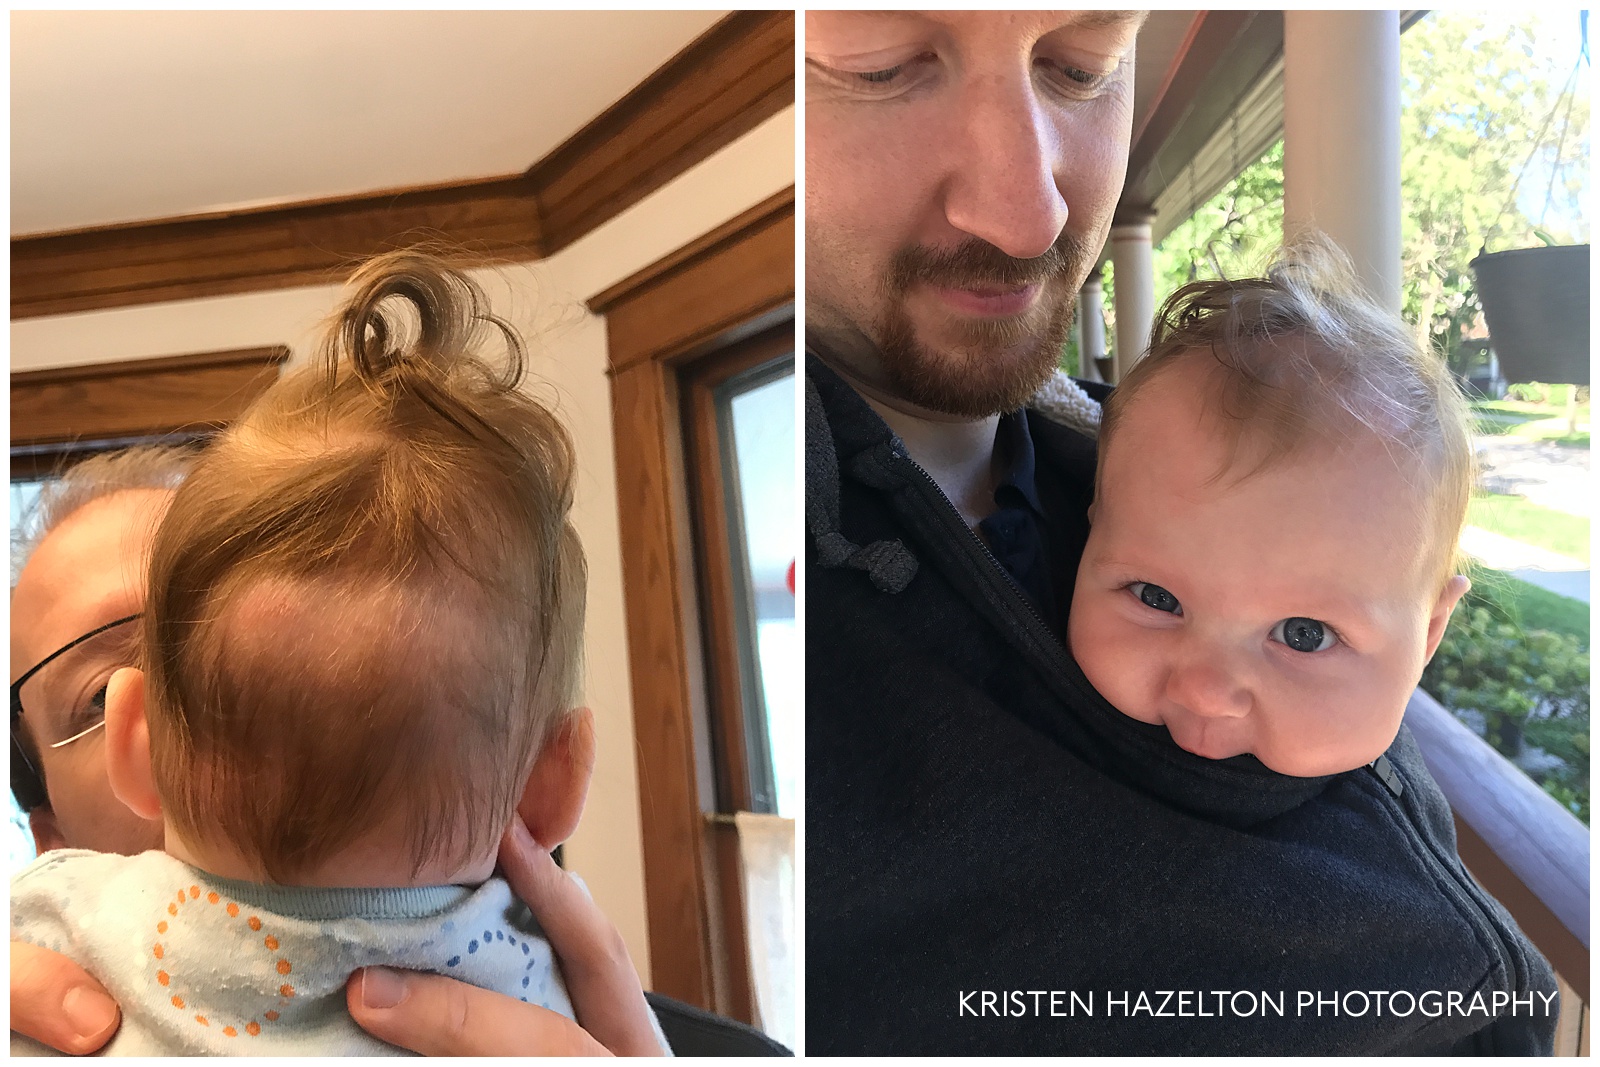 Dramatic baby hair curls, and baby wrapped up in Dad's sweatshirt